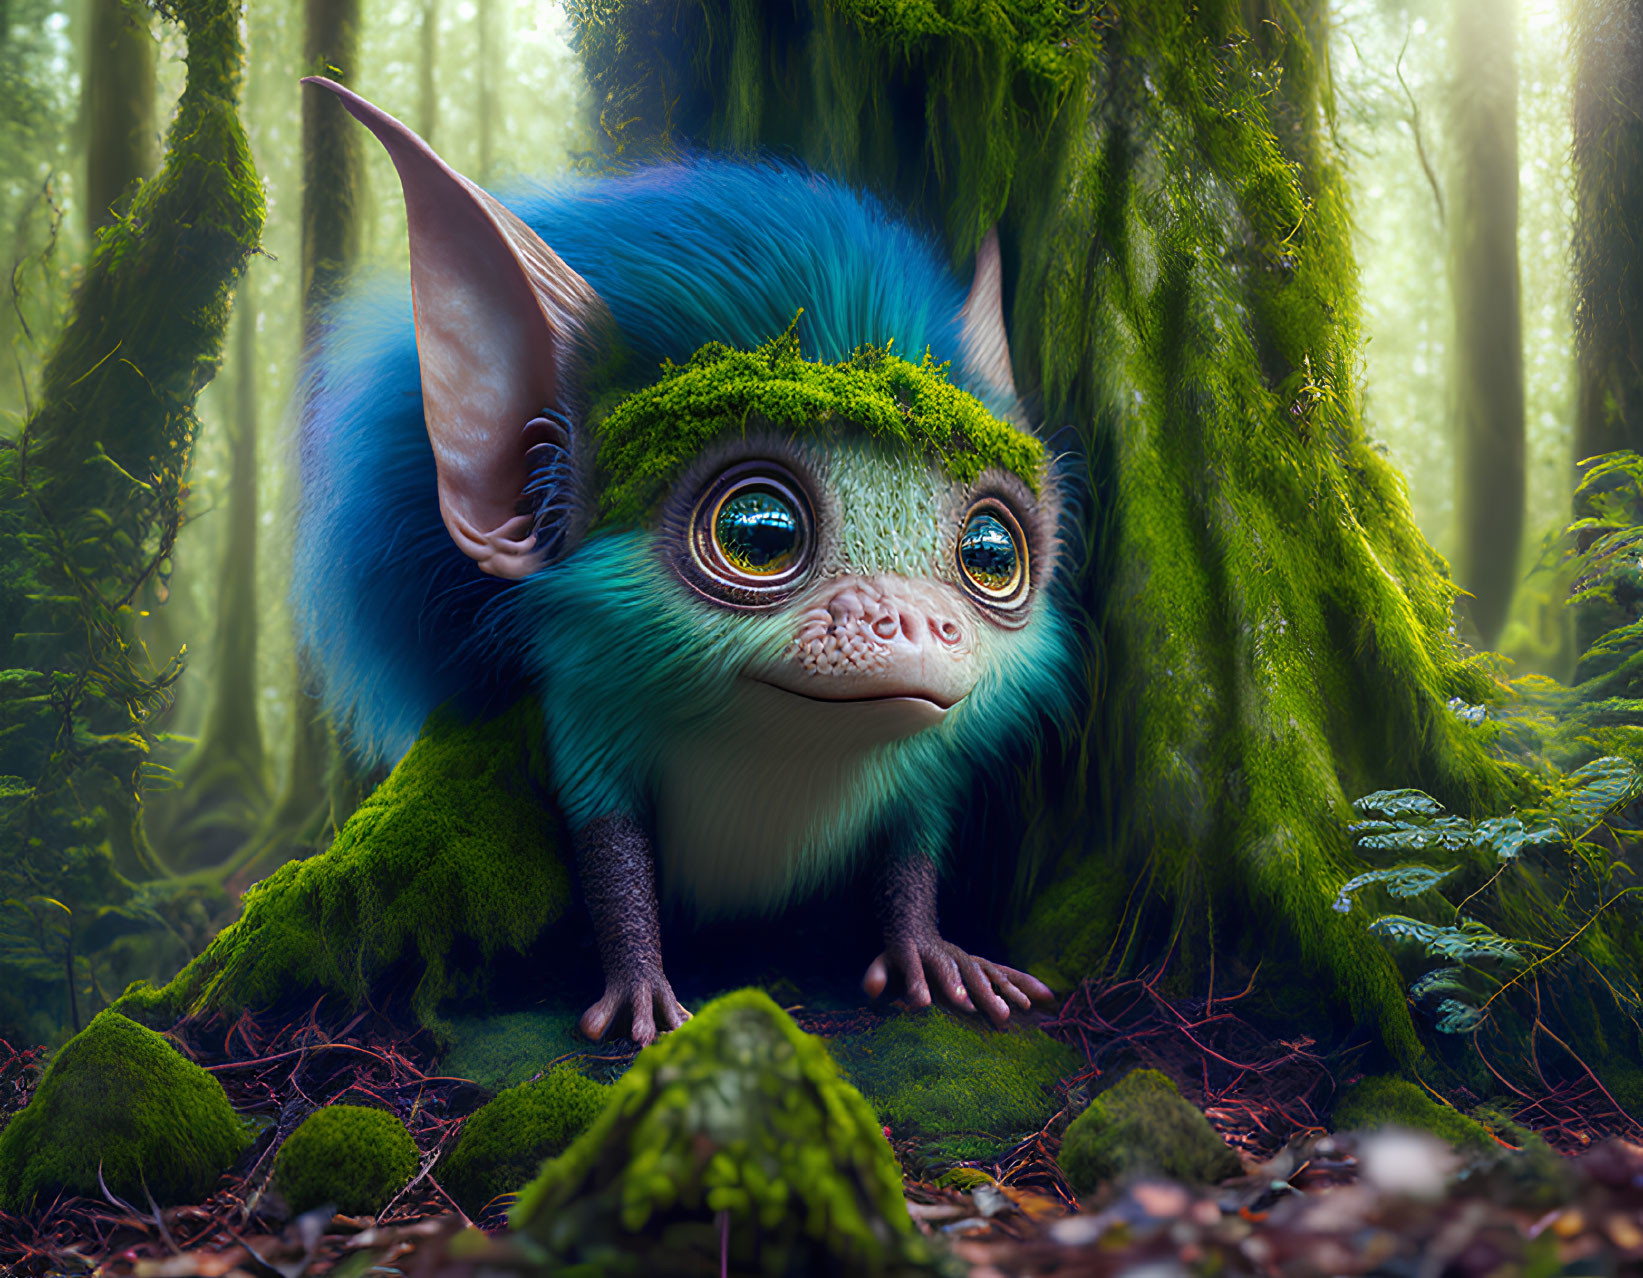 Blue-furred creature with large ears in mossy forest setting